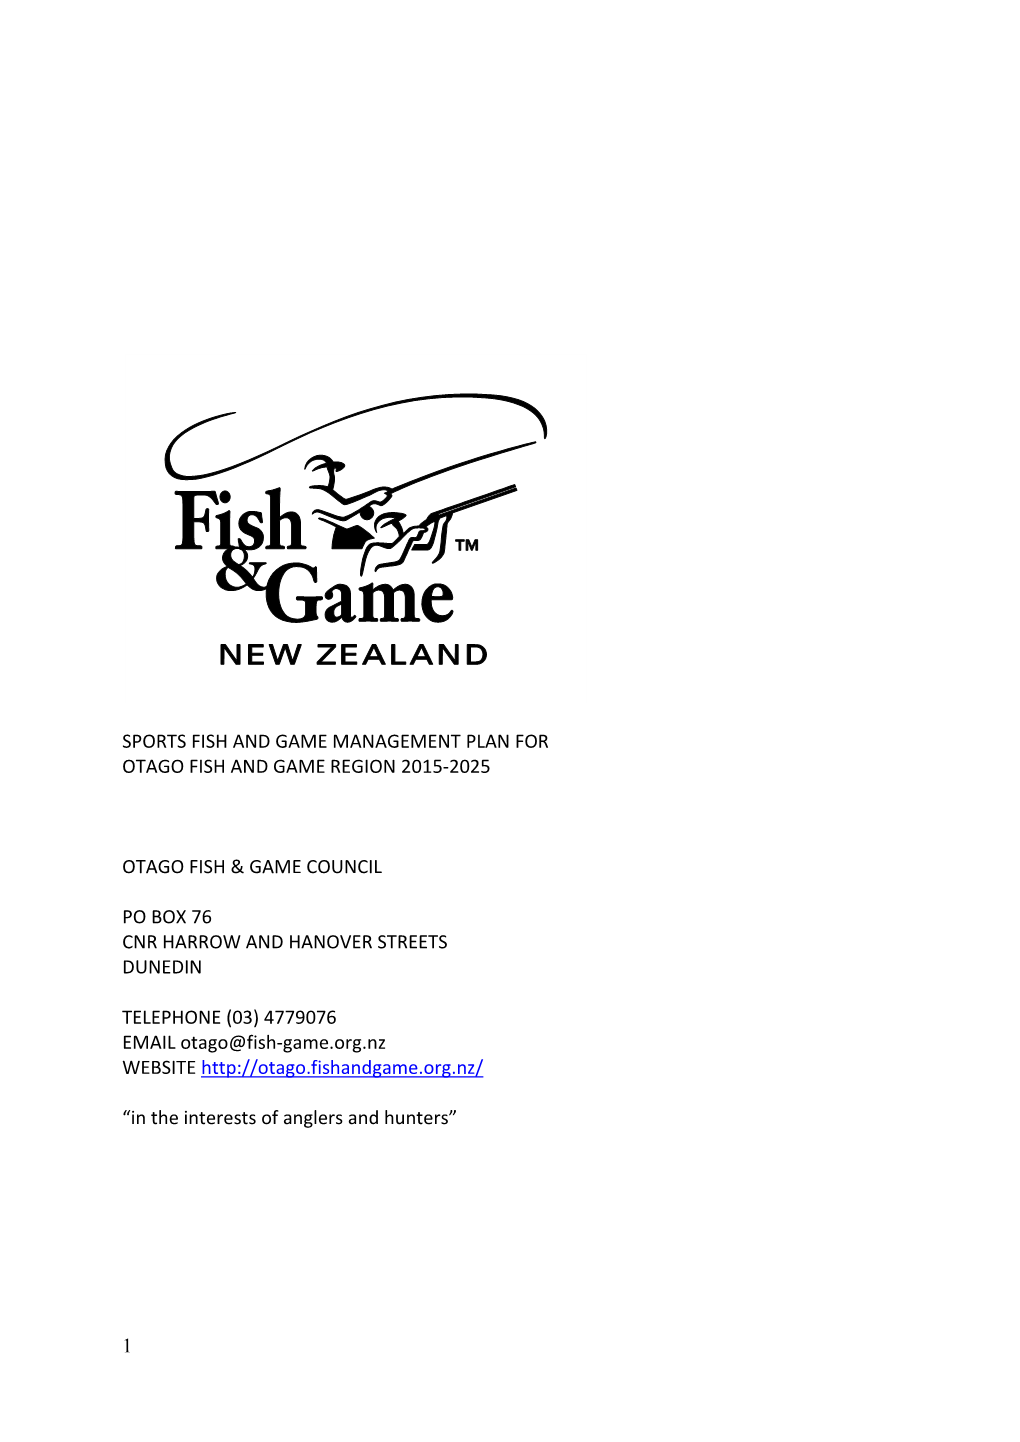 Sports Fish and Game Management Plan for Otago Fish and Game Region 2015-2025